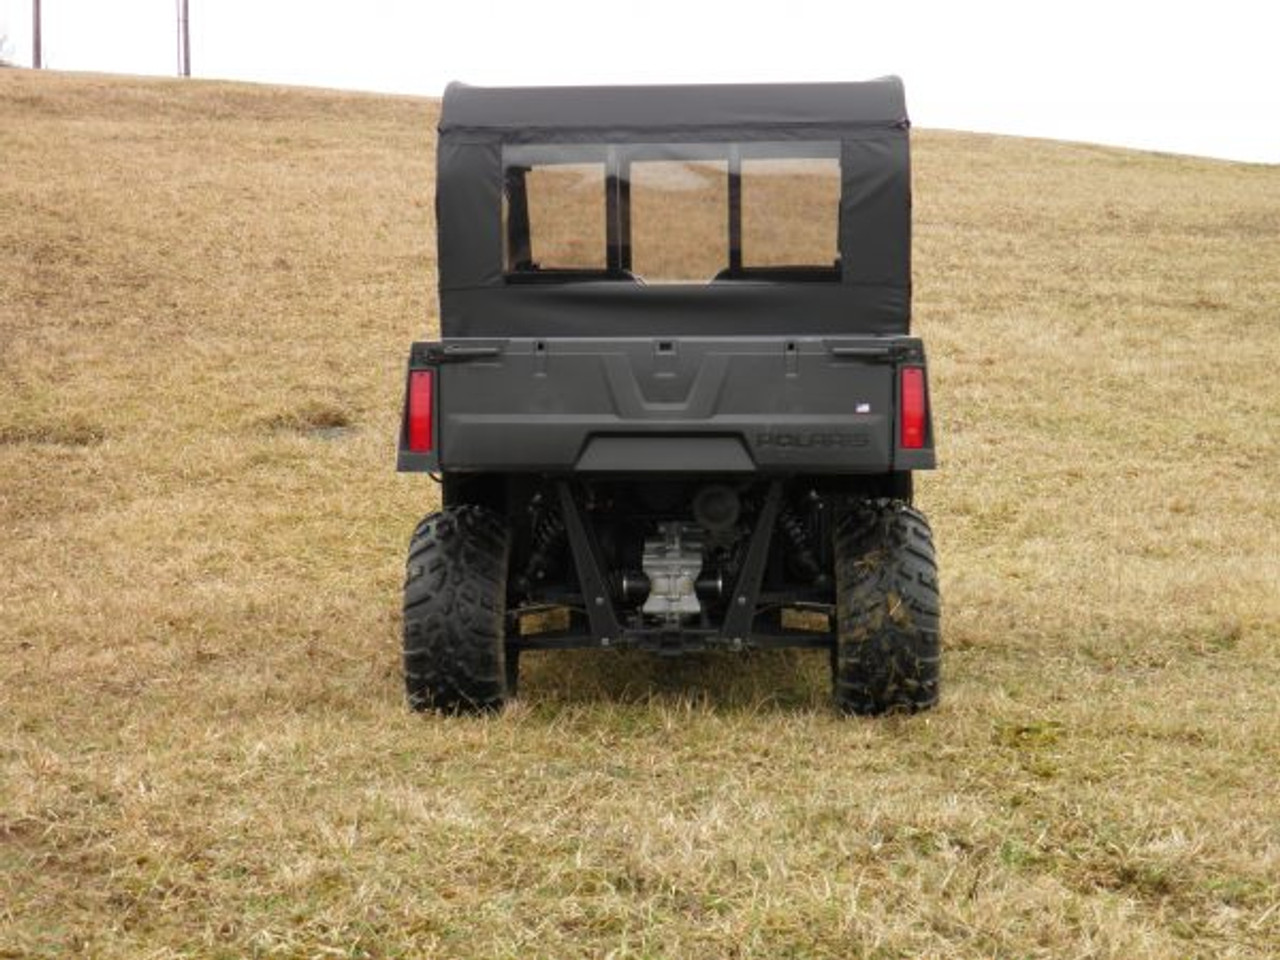 3 Star side x side Polaris Ranger Mid-Size Crew 500/570 full cab enclosure with vinyl windshield rear view